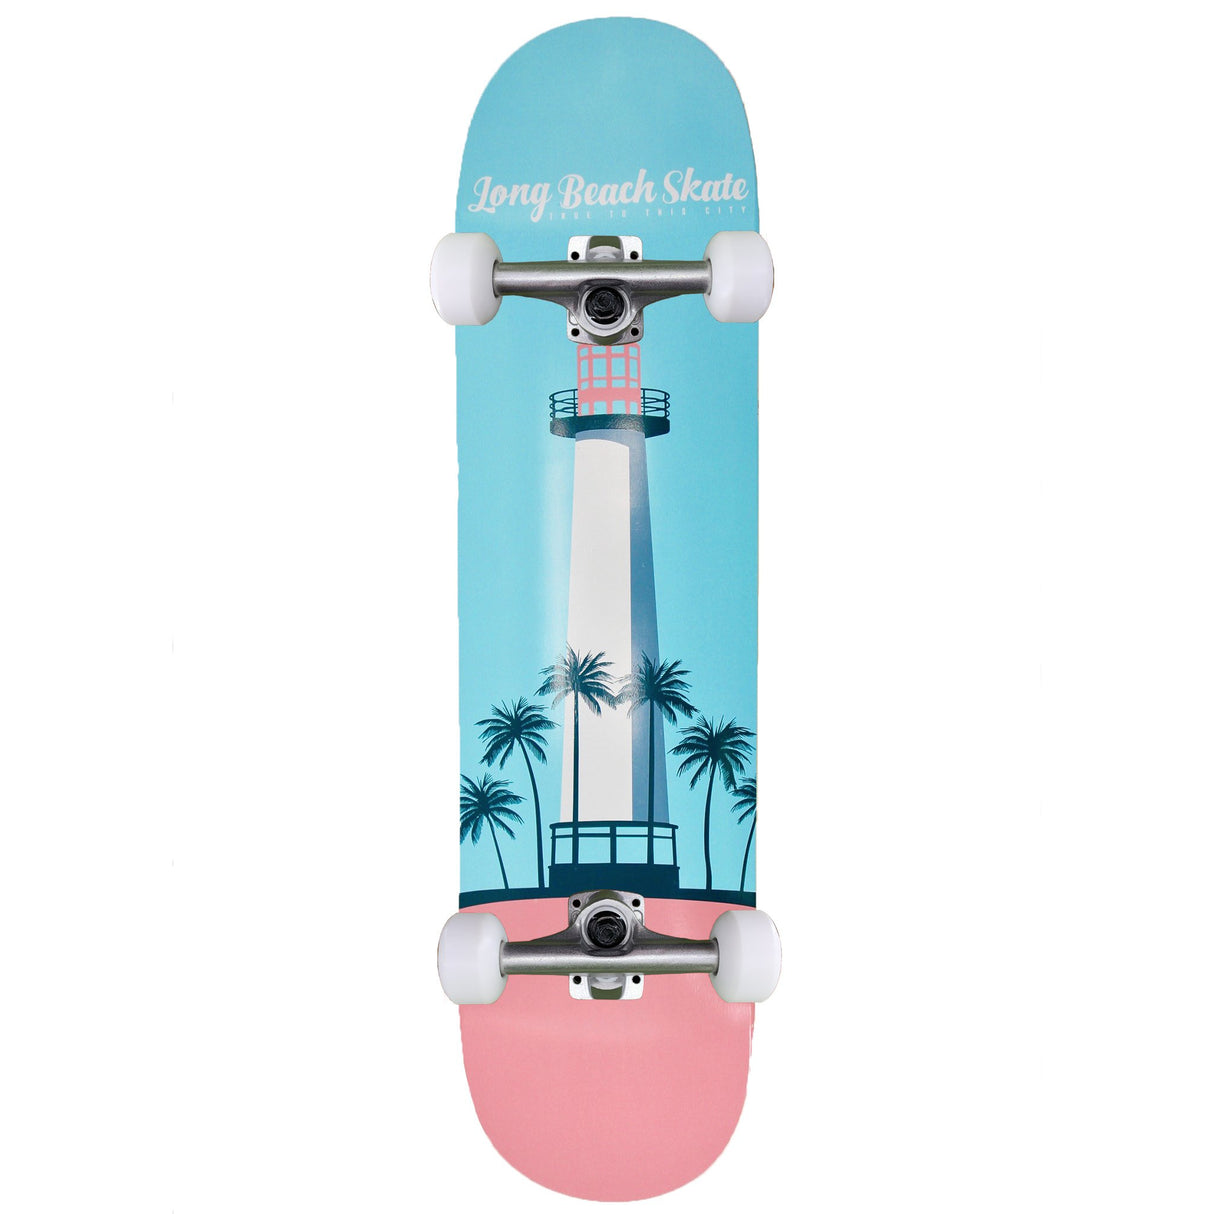 Long Beach Skate Co. Lighthouse Remix Series V2 Turquoise & Pink Skateboard Complete